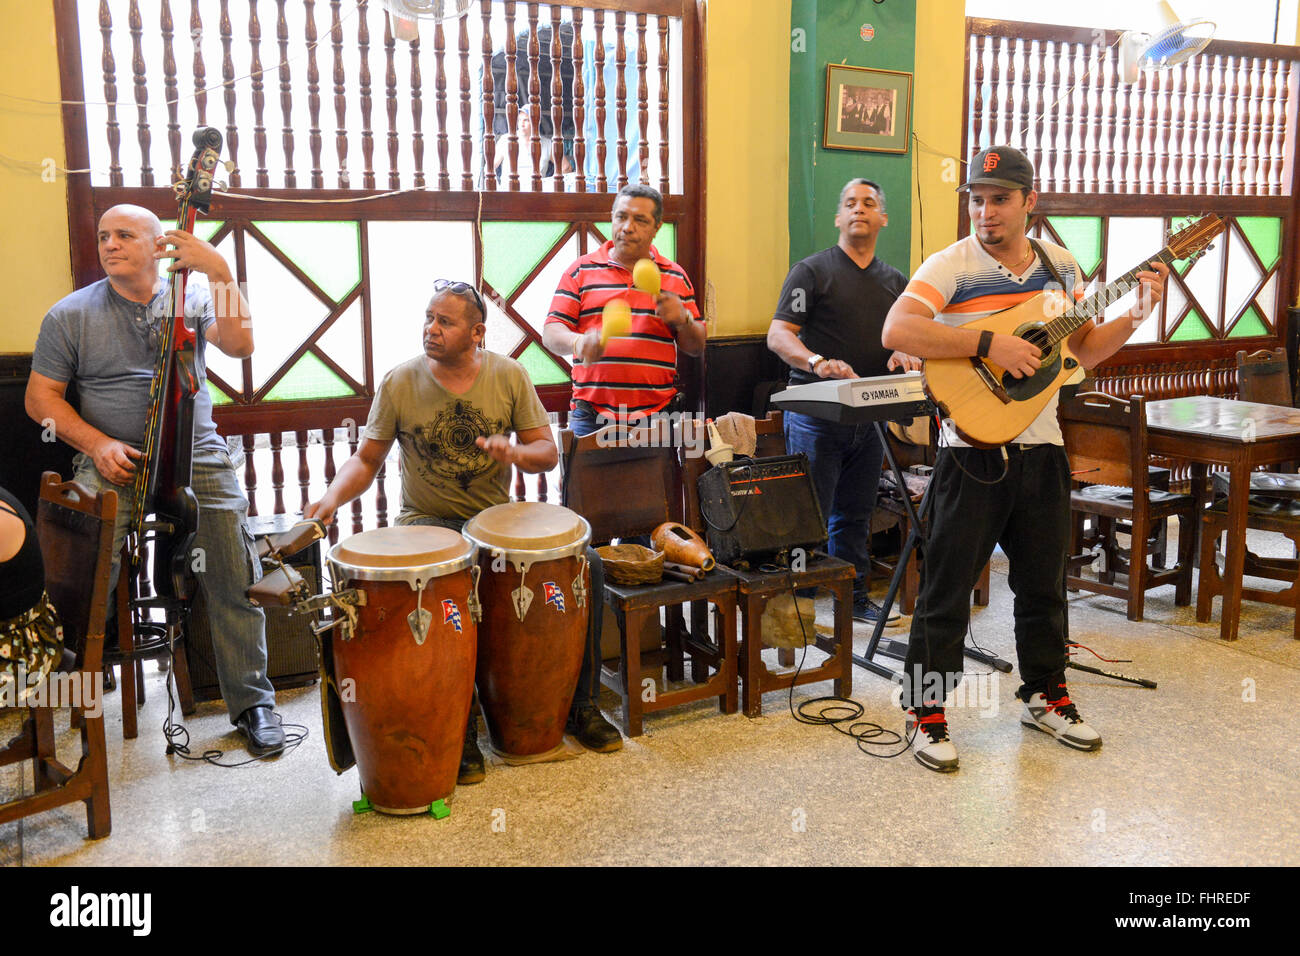 Havana, Cuba - 27 January 2016: Traditional music band playing for tourists in a restaurant of Old Havana on Cuba Stock Photo